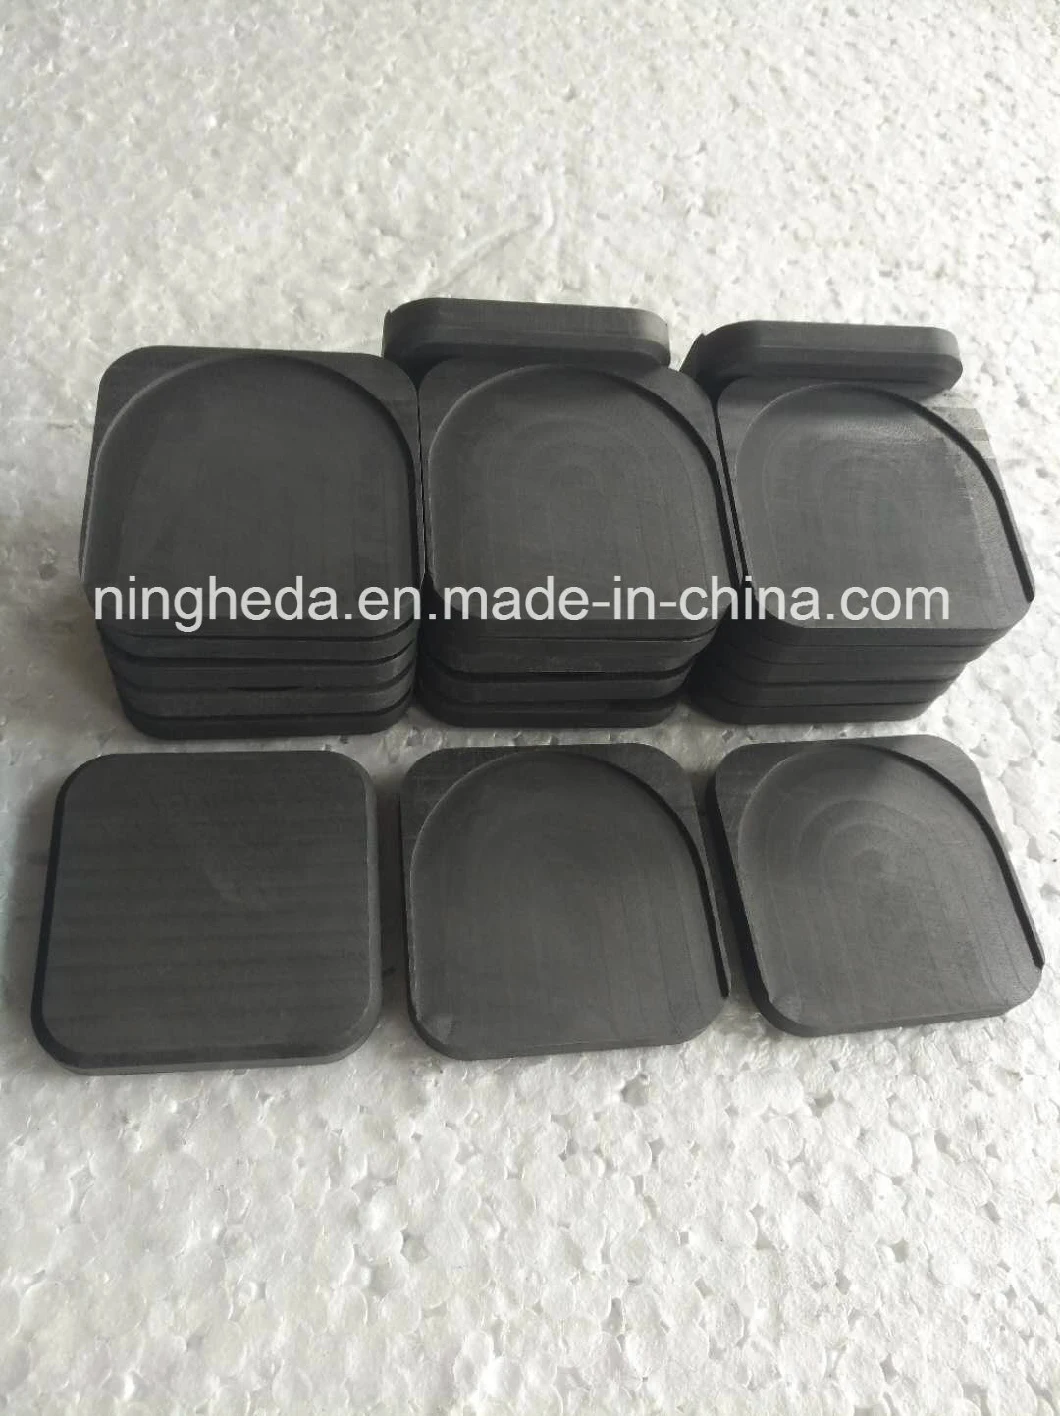 Graphite Boat for Powder Metallurgy and Cemented Carbide